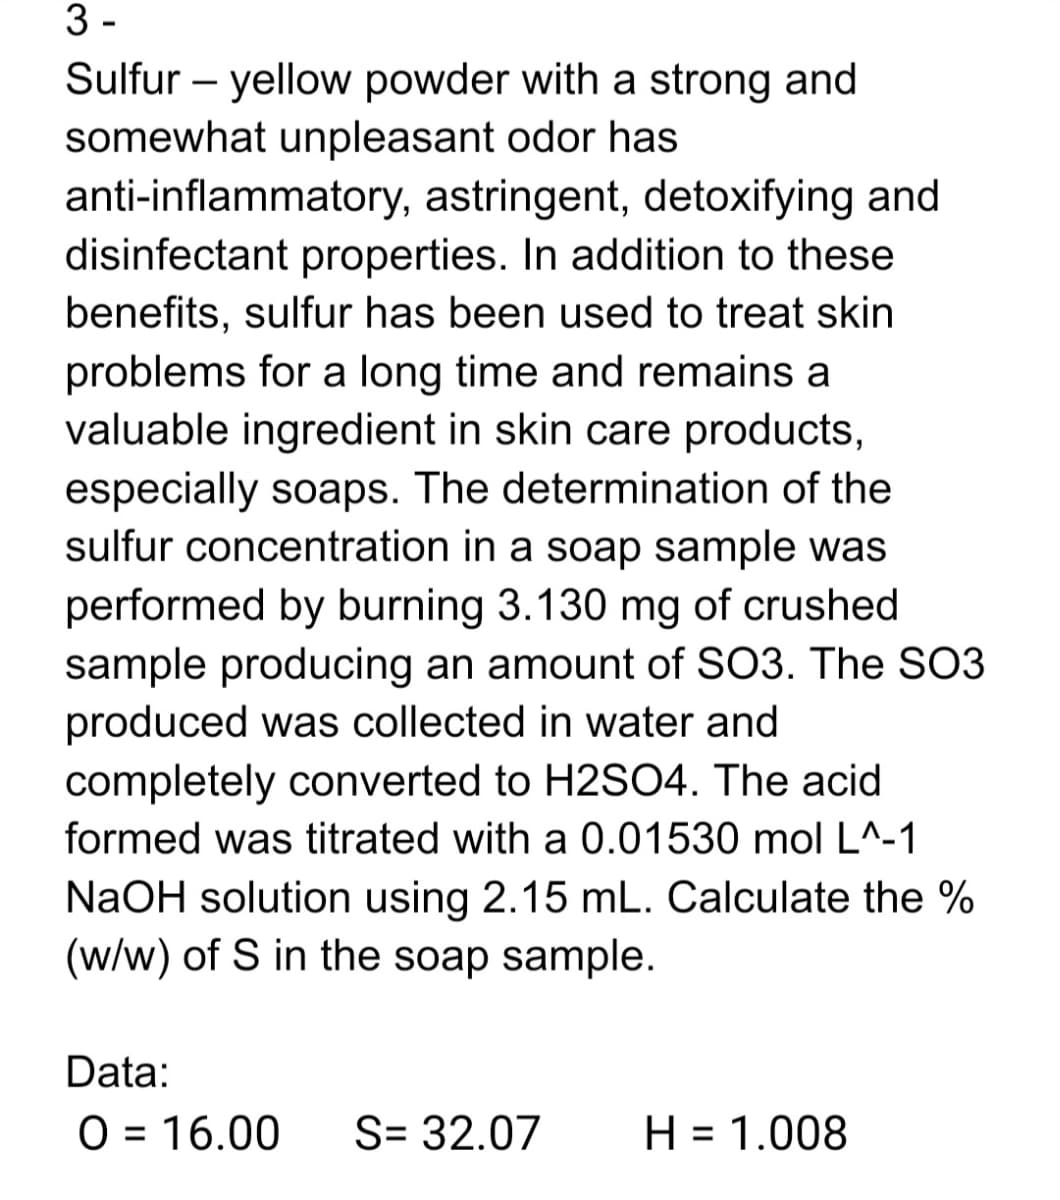 3 -
Sulfur – yellow powder with a strong and
somewhat unpleasant odor has
anti-inflammatory, astringent, detoxifying and
disinfectant properties. In addition to these
benefits, sulfur has been used to treat skin
problems for a long time and remains a
valuable ingredient in skin care products,
especially soaps. The determination of the
sulfur concentration in a soap sample was
performed by burning 3.130 mg of crushed
sample producing an amount of SO3. The SO3
produced was collected in water and
completely converted to H2SO4. The acid
formed was titrated with a 0.01530 mol L^-1
NaOH solution using 2.15 mL. Calculate the %
(w/w) of S in the soap sample.
Data:
O = 16.00
S= 32.07
H = 1.008
%3D
